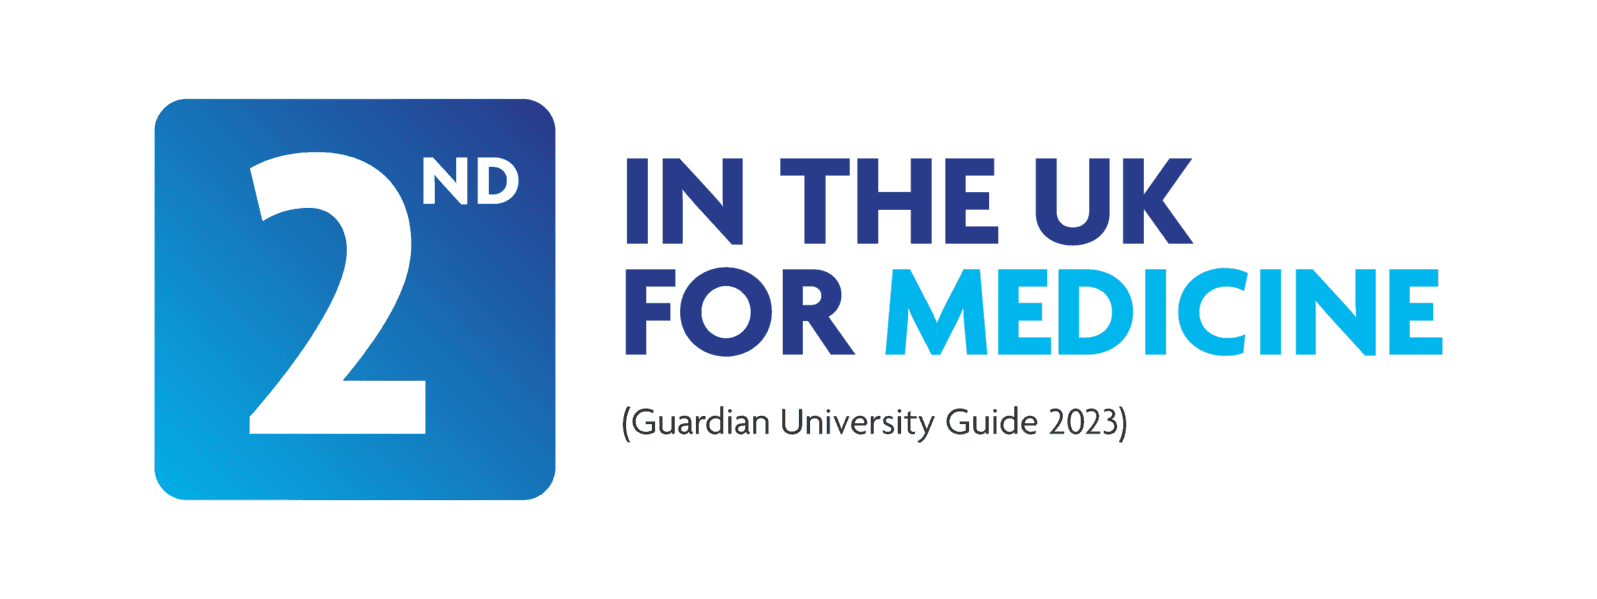 2nd in the UK for Medicine (Guardian University Guide 2023)